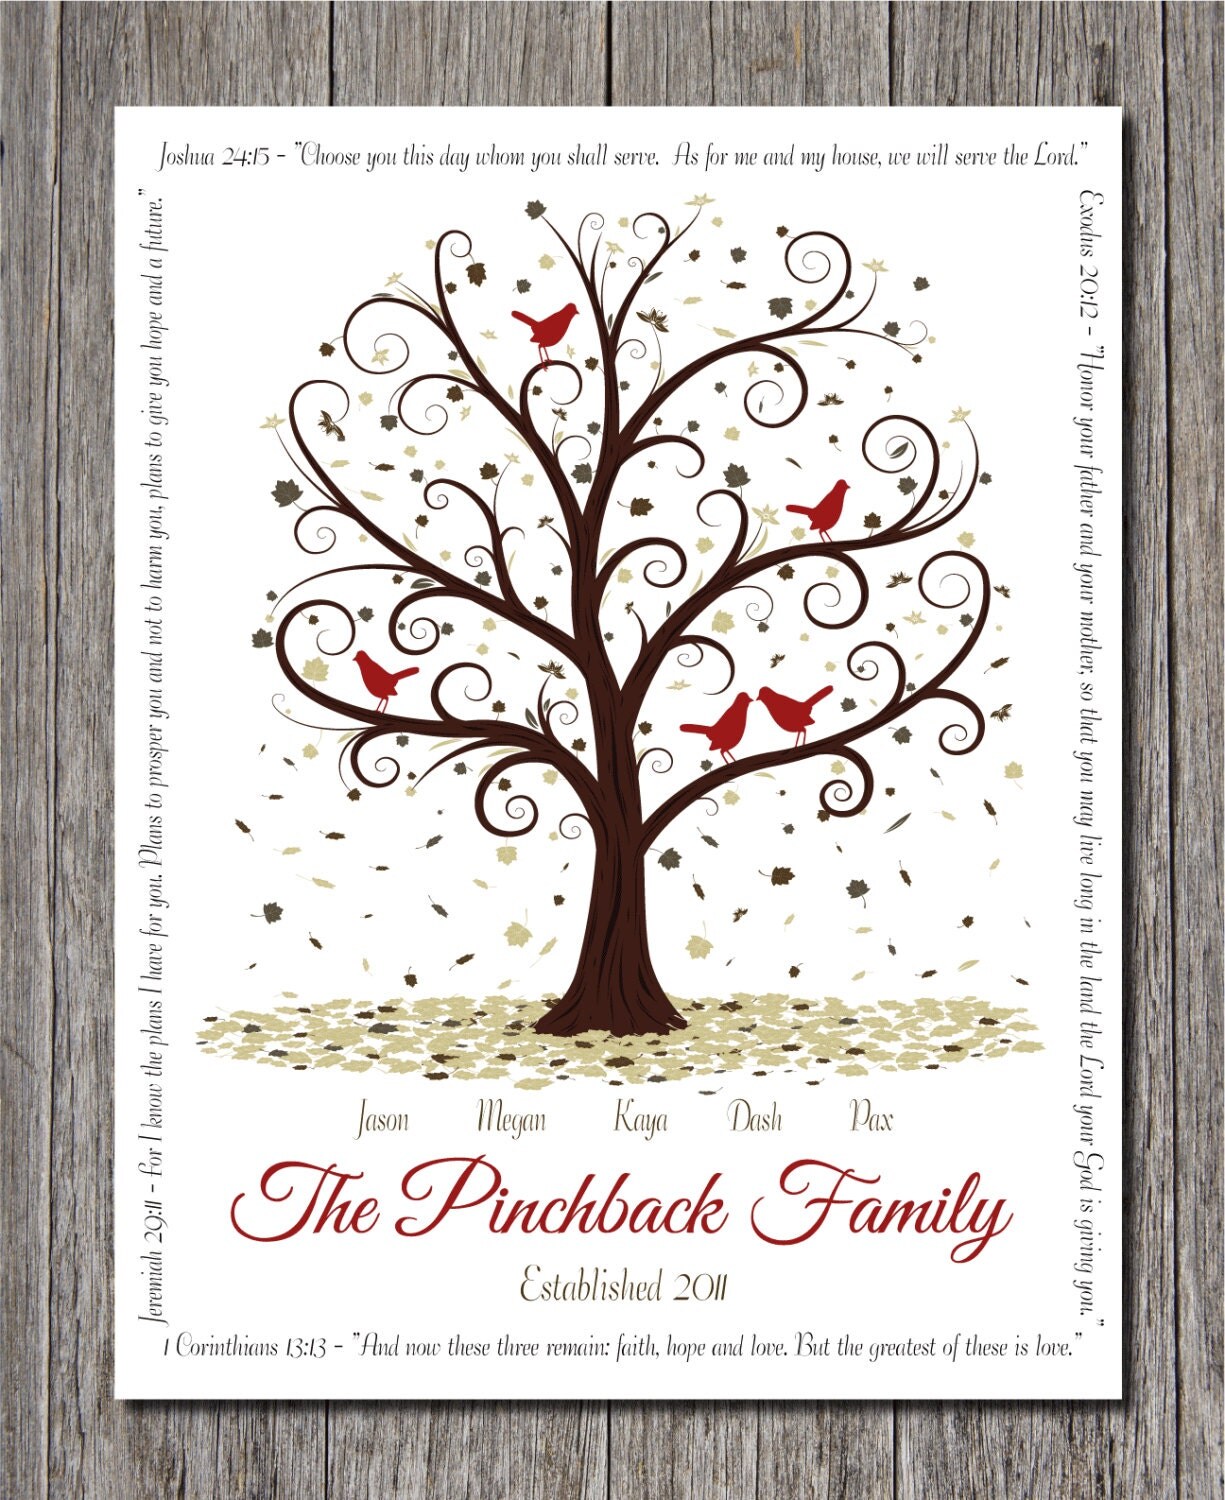 Family Tree with Bible Verse Border 18x24